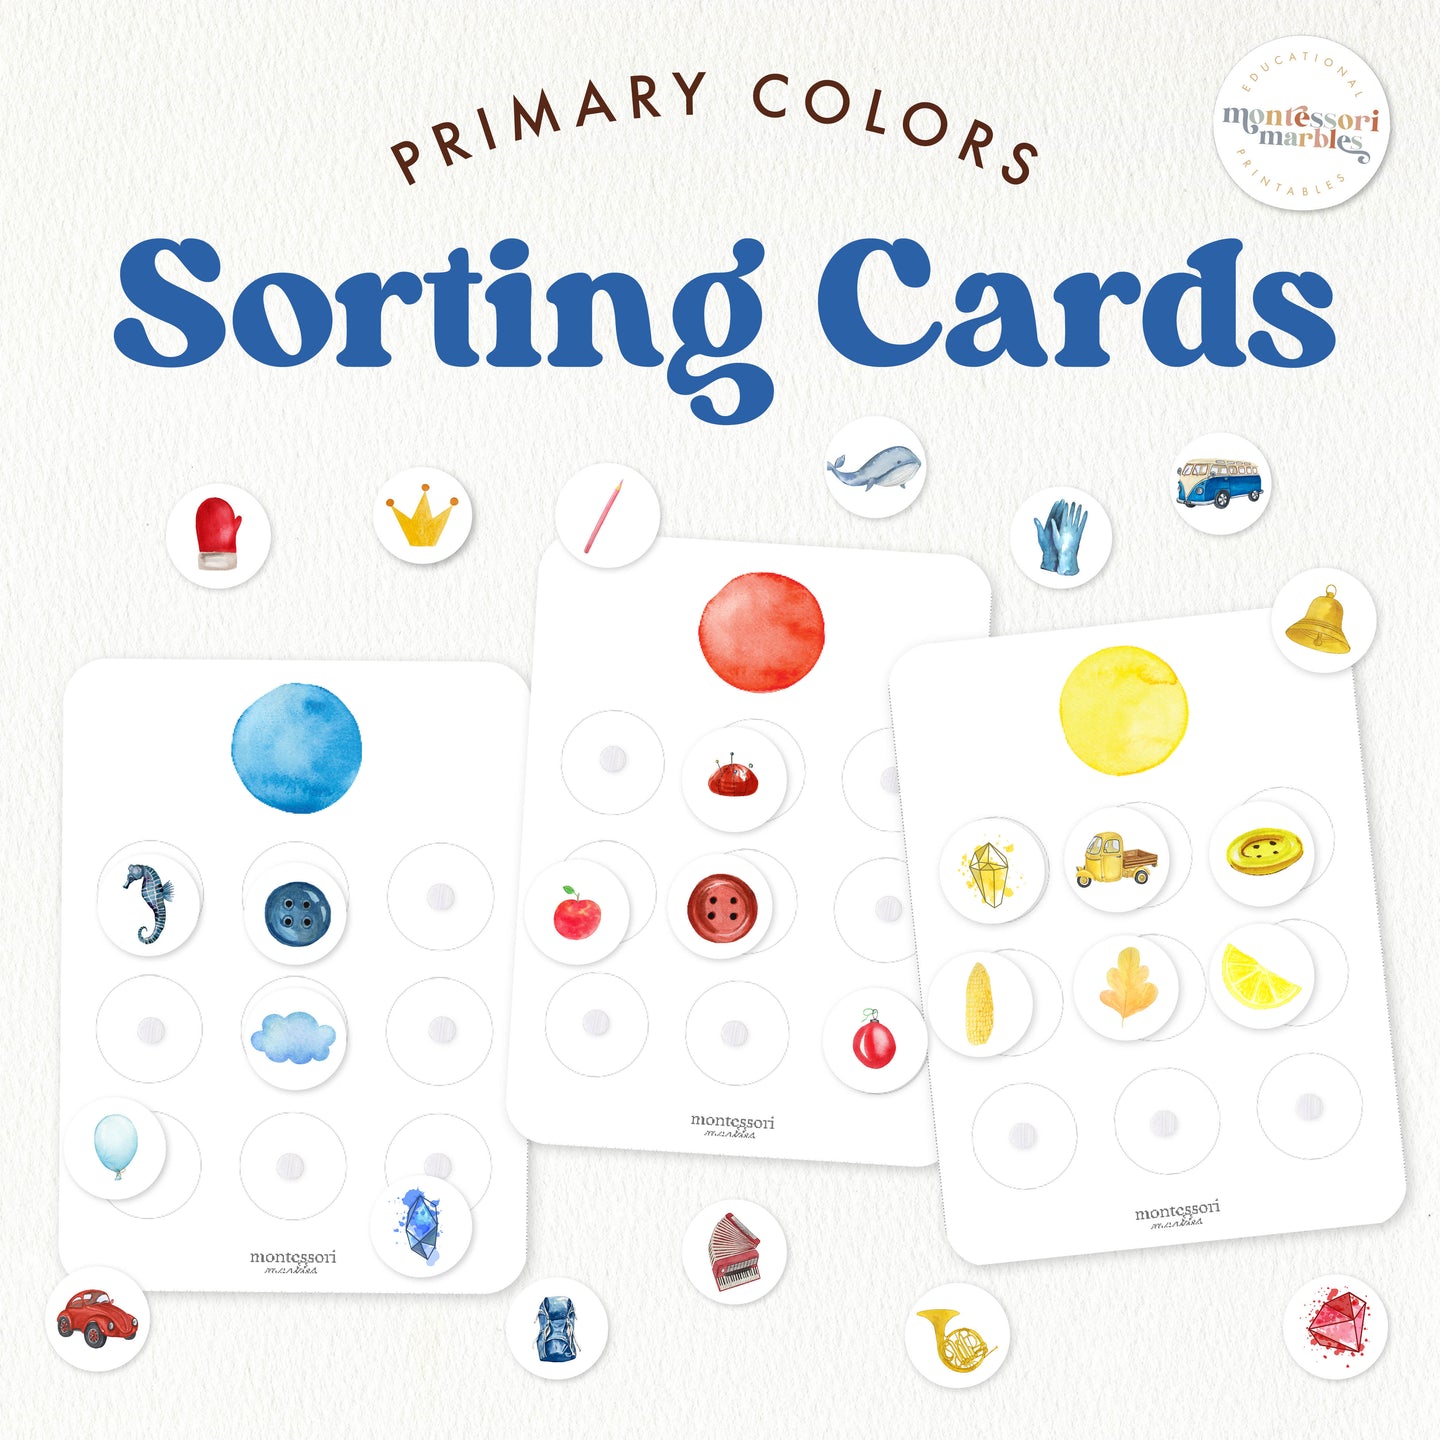 Primary Colors Sorting Cards